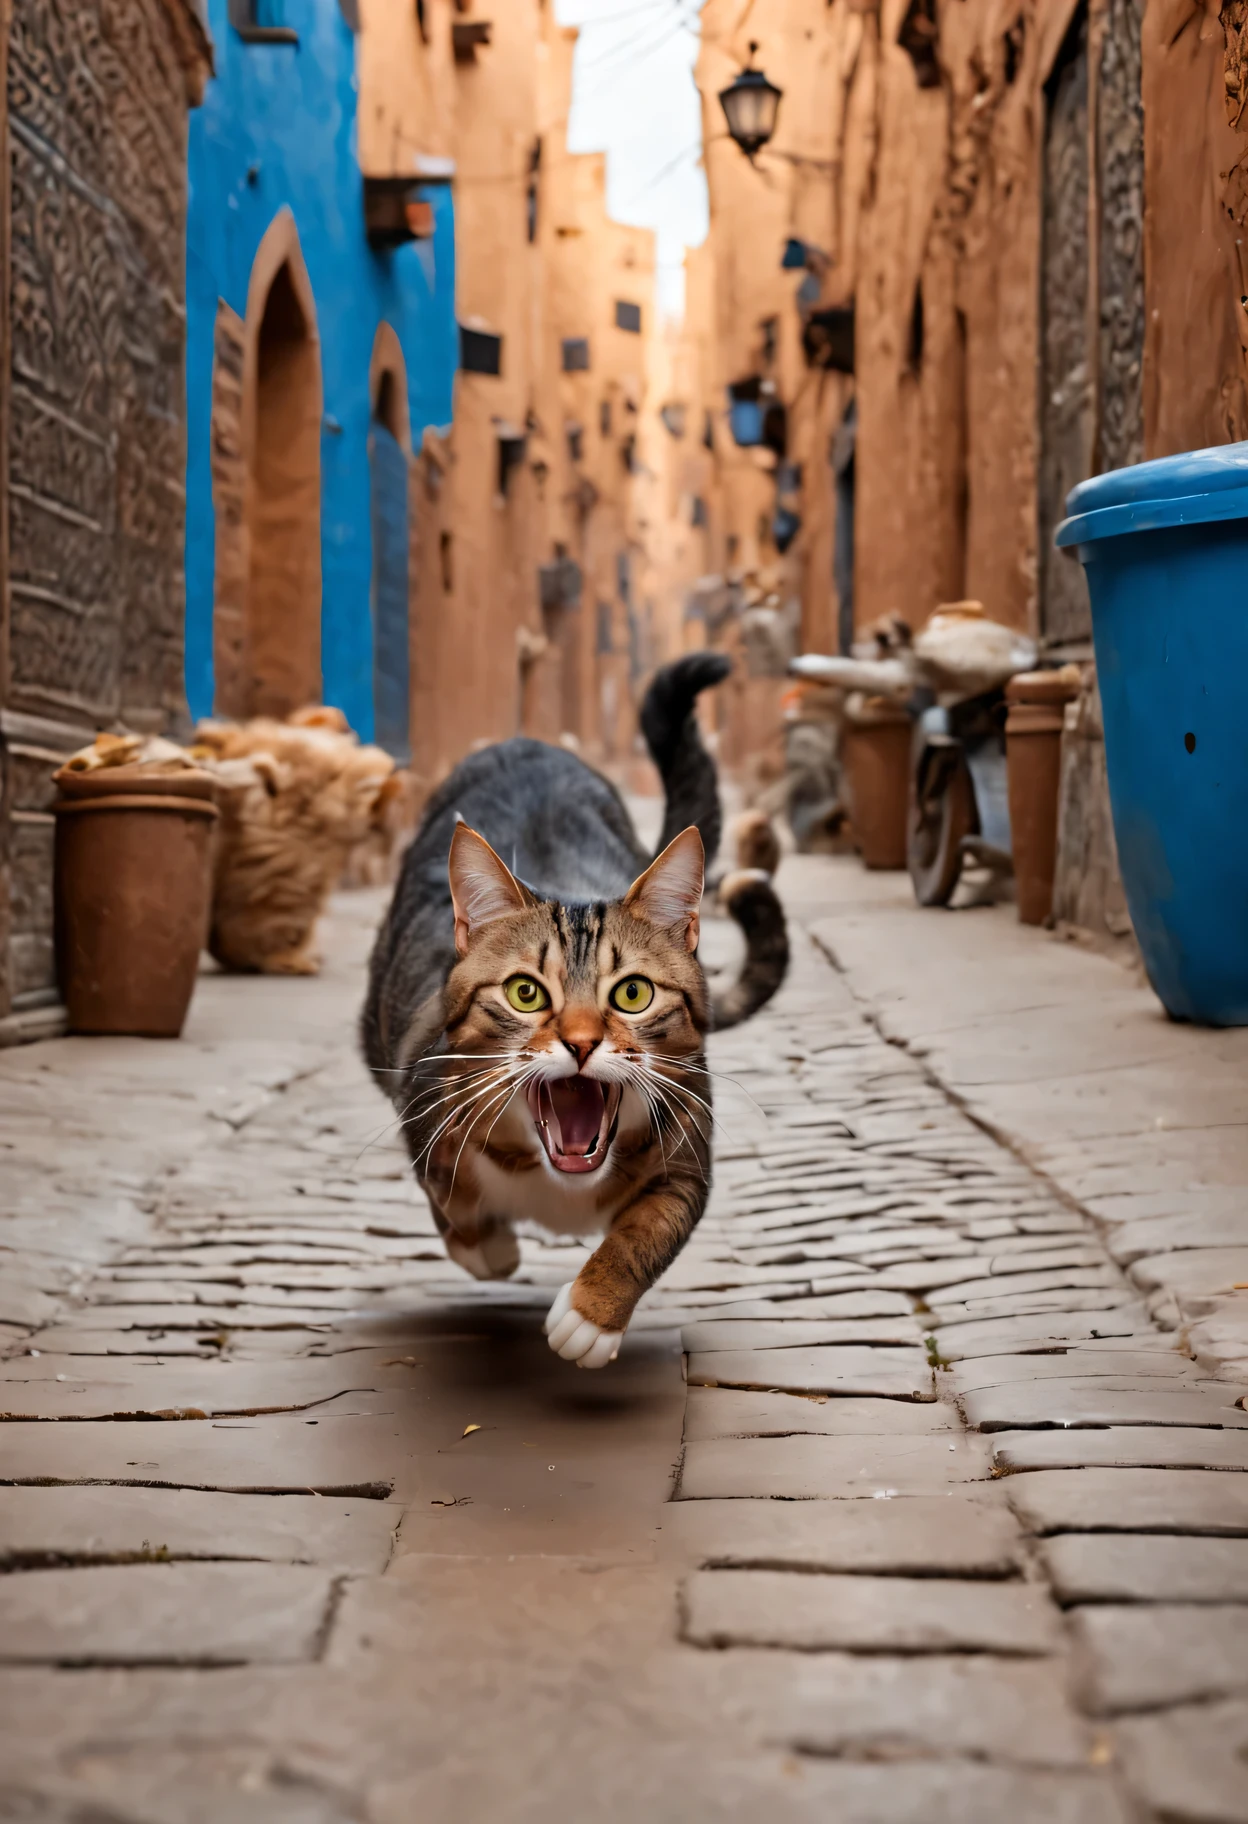 there is a gato that is running down the street with Moroccan people chasing it, awesome gato, foto extremamente realista, Tom e Jerry da vida real, happy gato, gato attacking Marrakech, funny gato, running gato, !!! gato!!!, !!!! gato!!!!, Foto altamente realista, imagem da vida real, imagem ultra realista, foto hiper real, sardinha roubada na boca, imagem hiperrealista